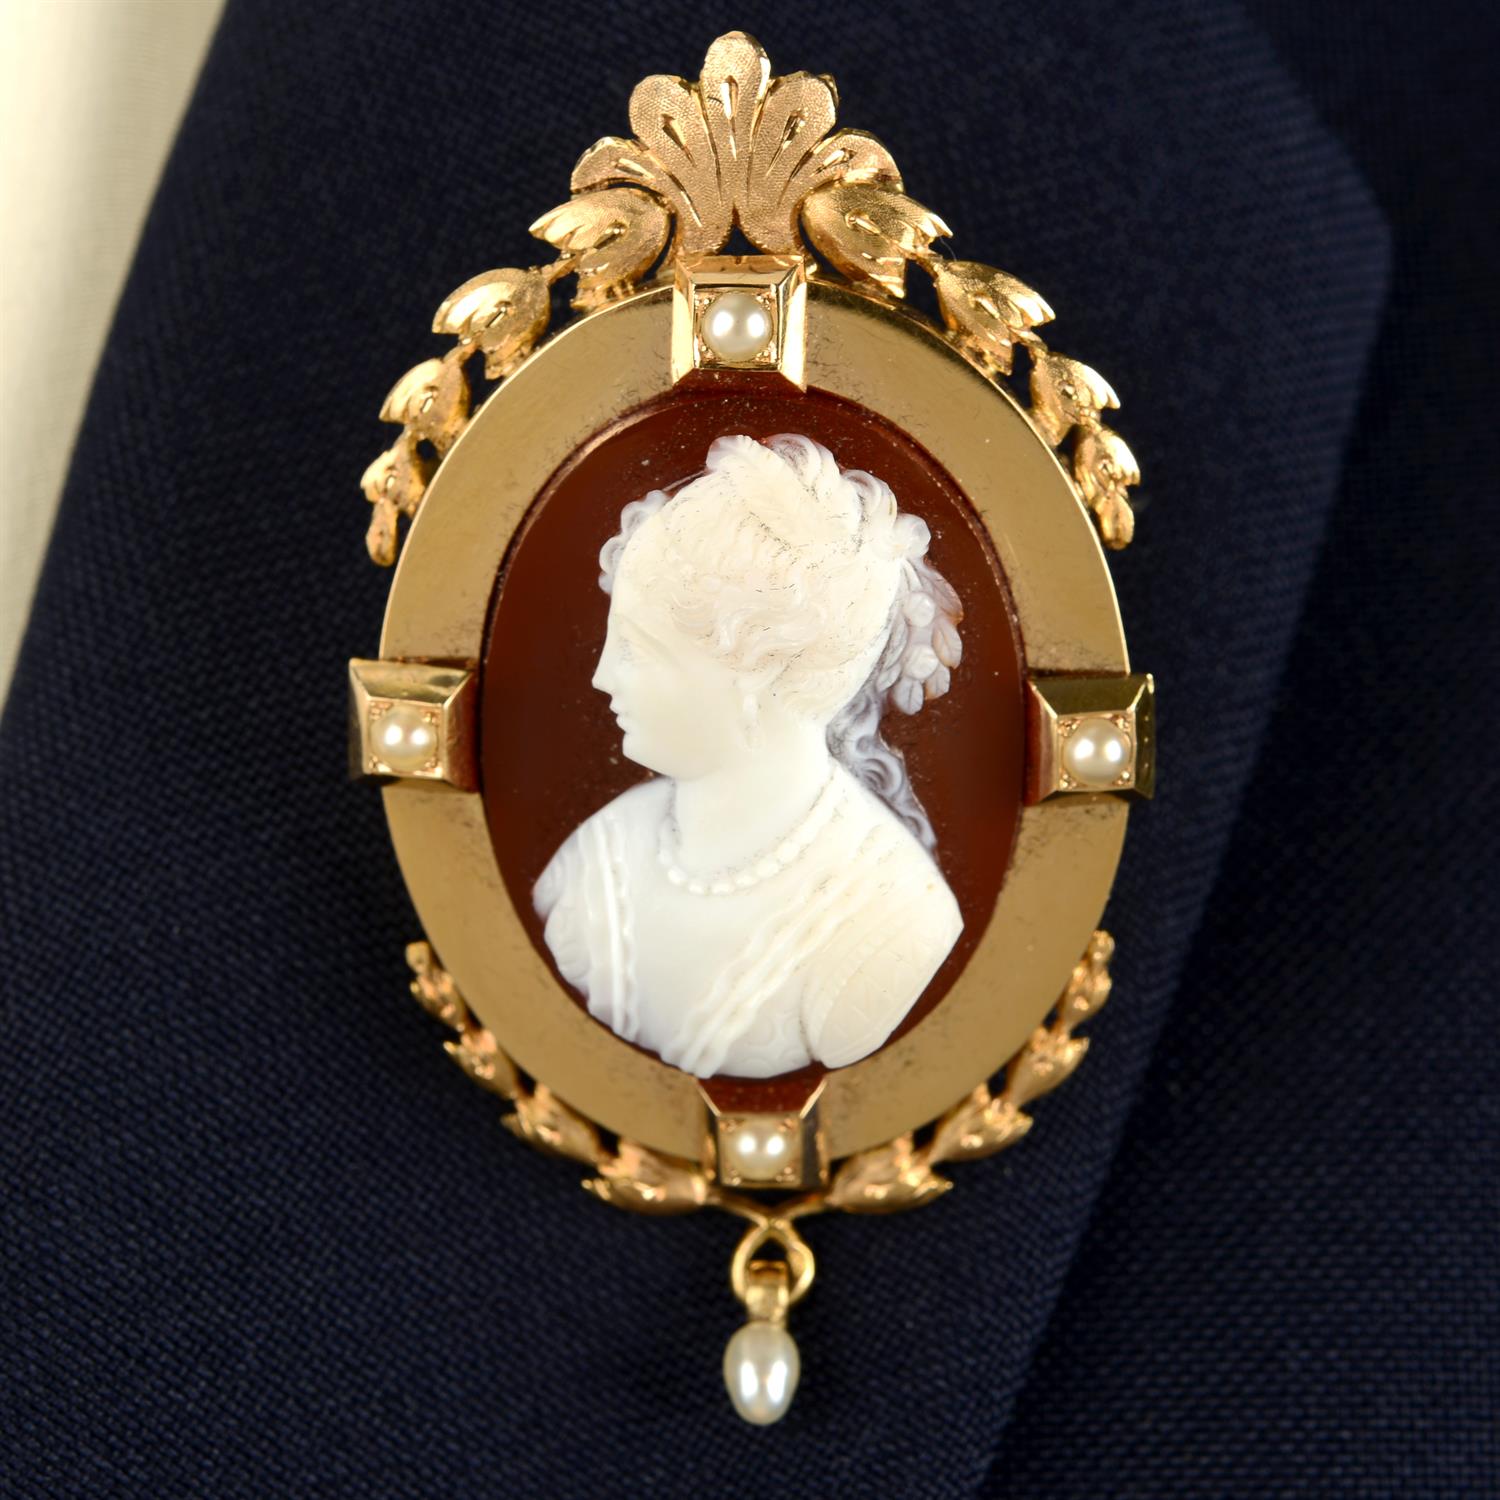 A late 19th century 18ct gold sardonyx cameo brooch/pendant, with split pearl accents and seed